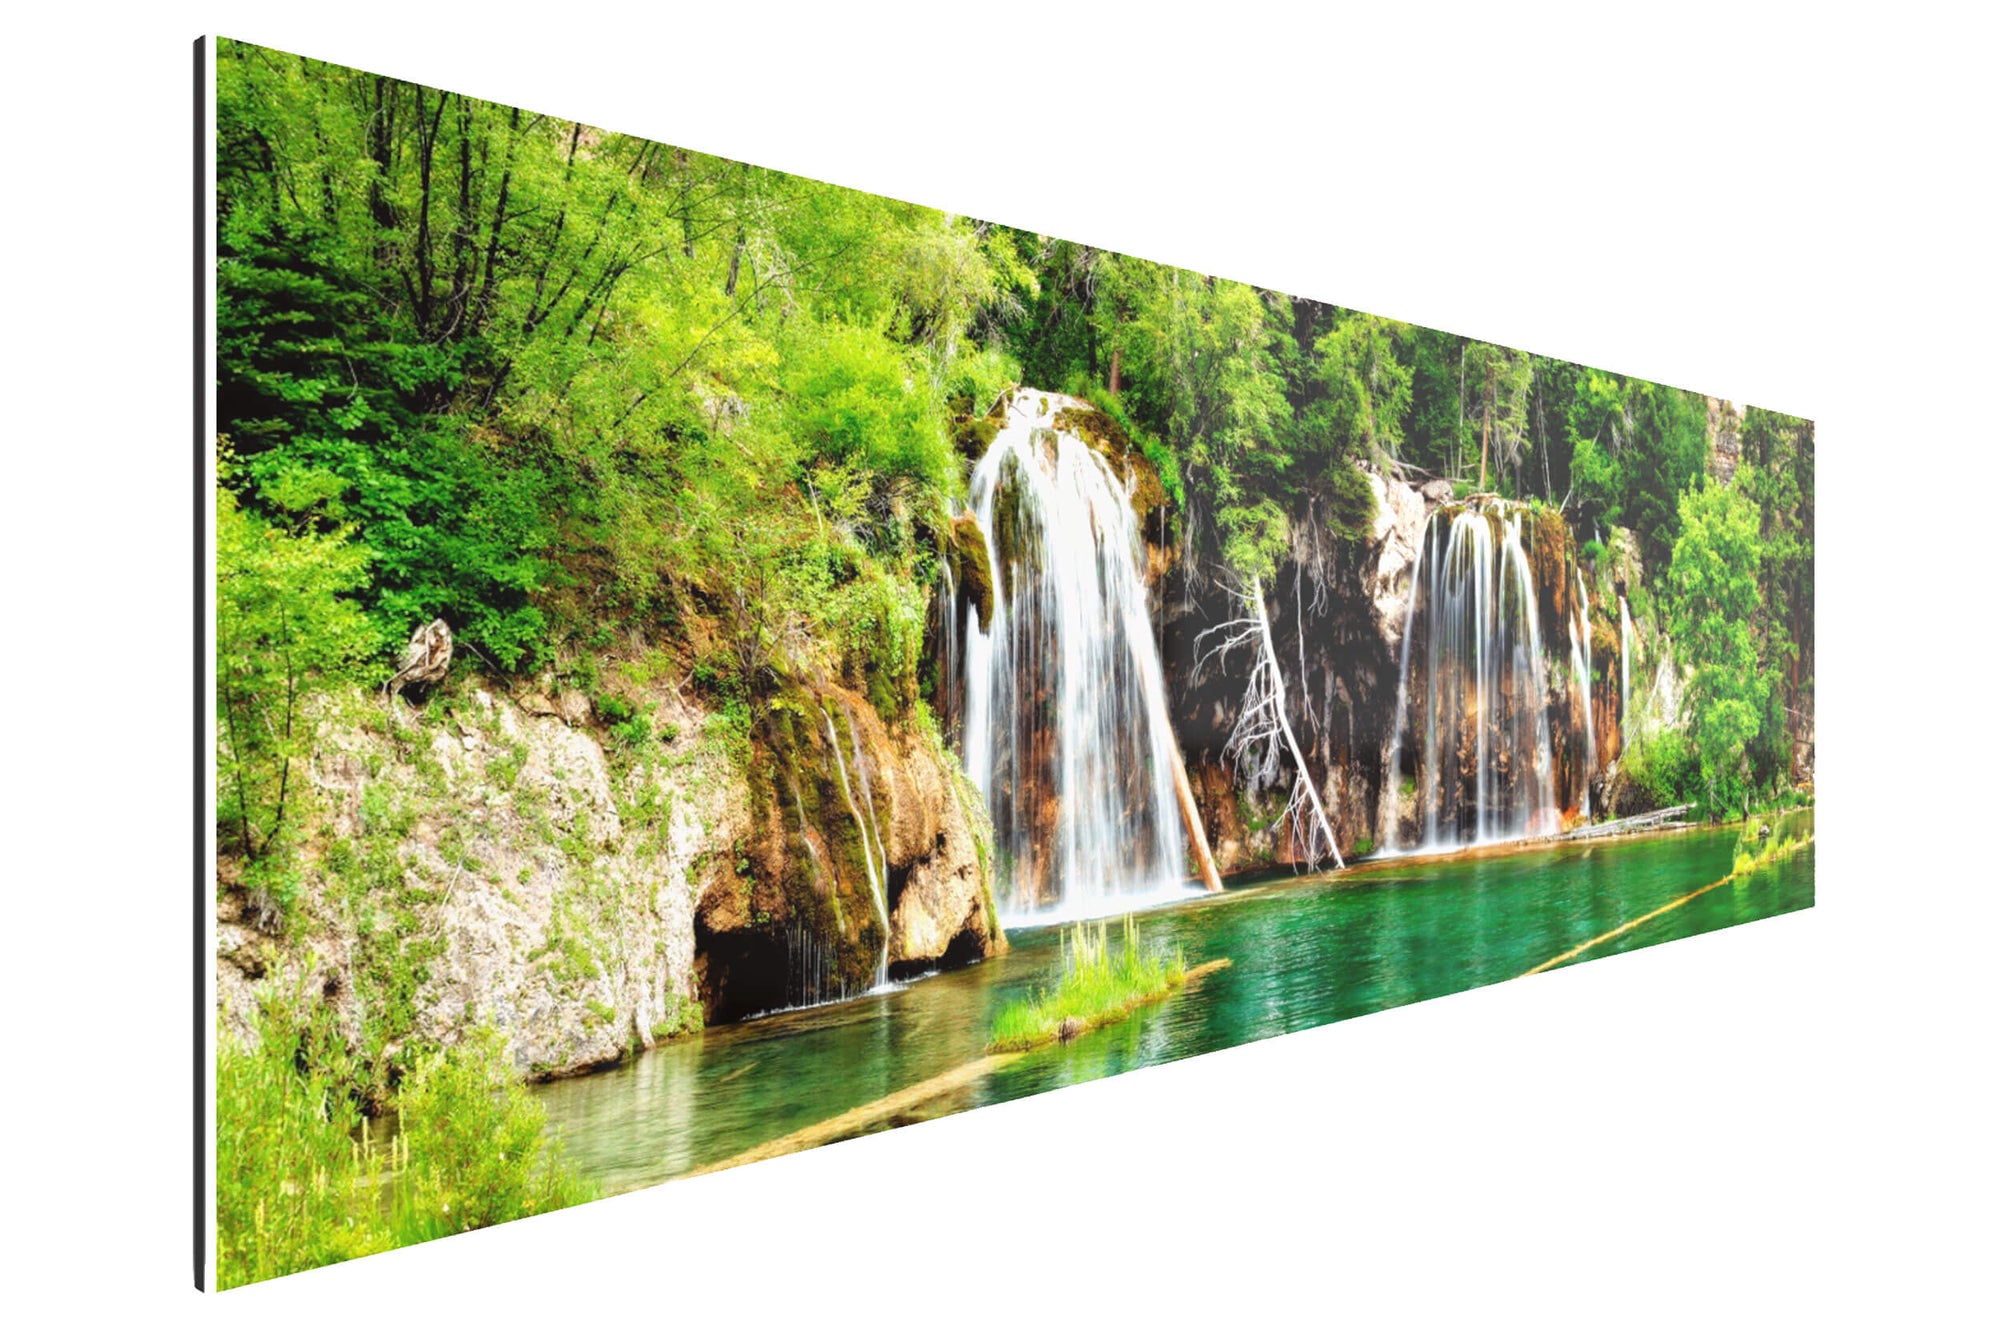 A TruLife acrylic waterfall picture of Hanging Lake in Colorado.